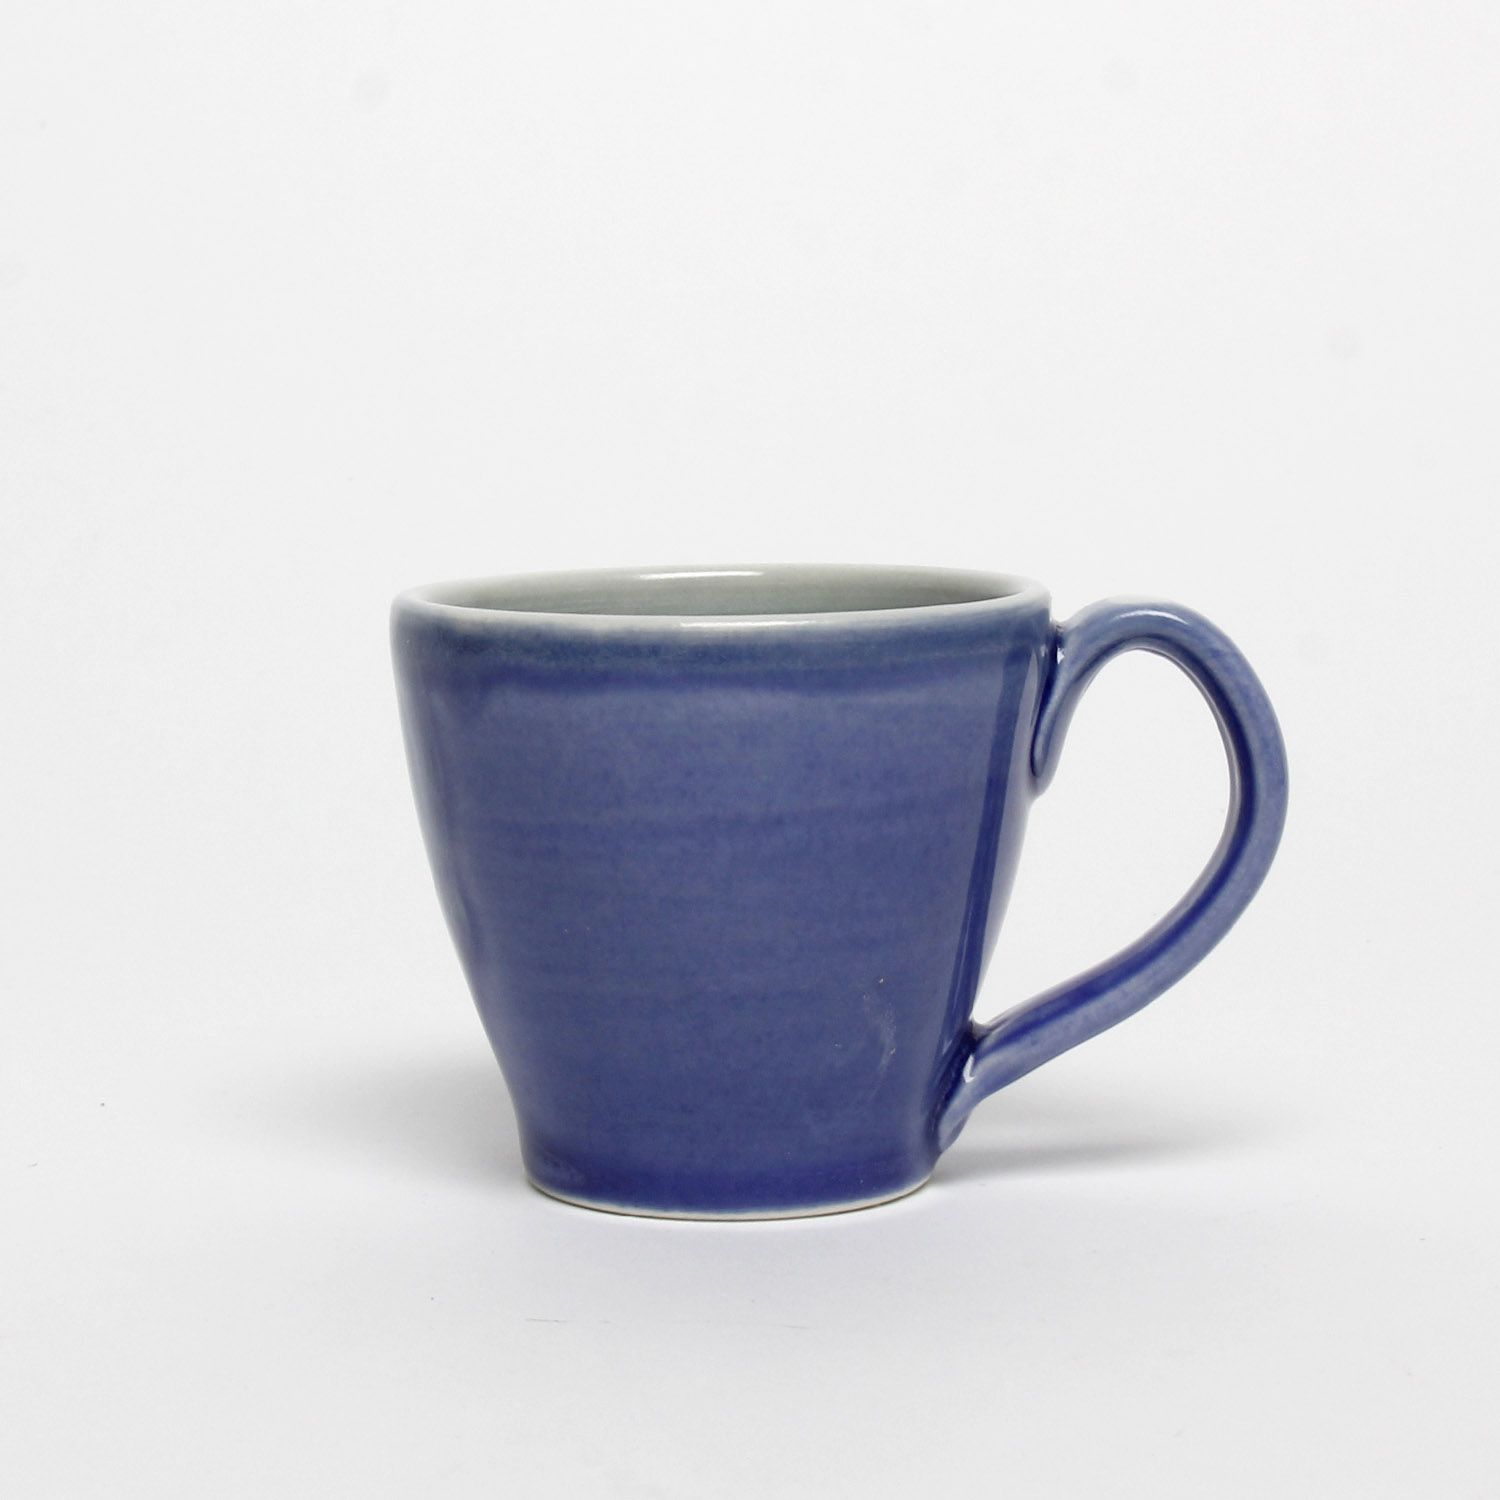 Thomas Aitken: Blue Espresso Cup Product Image 1 of 5